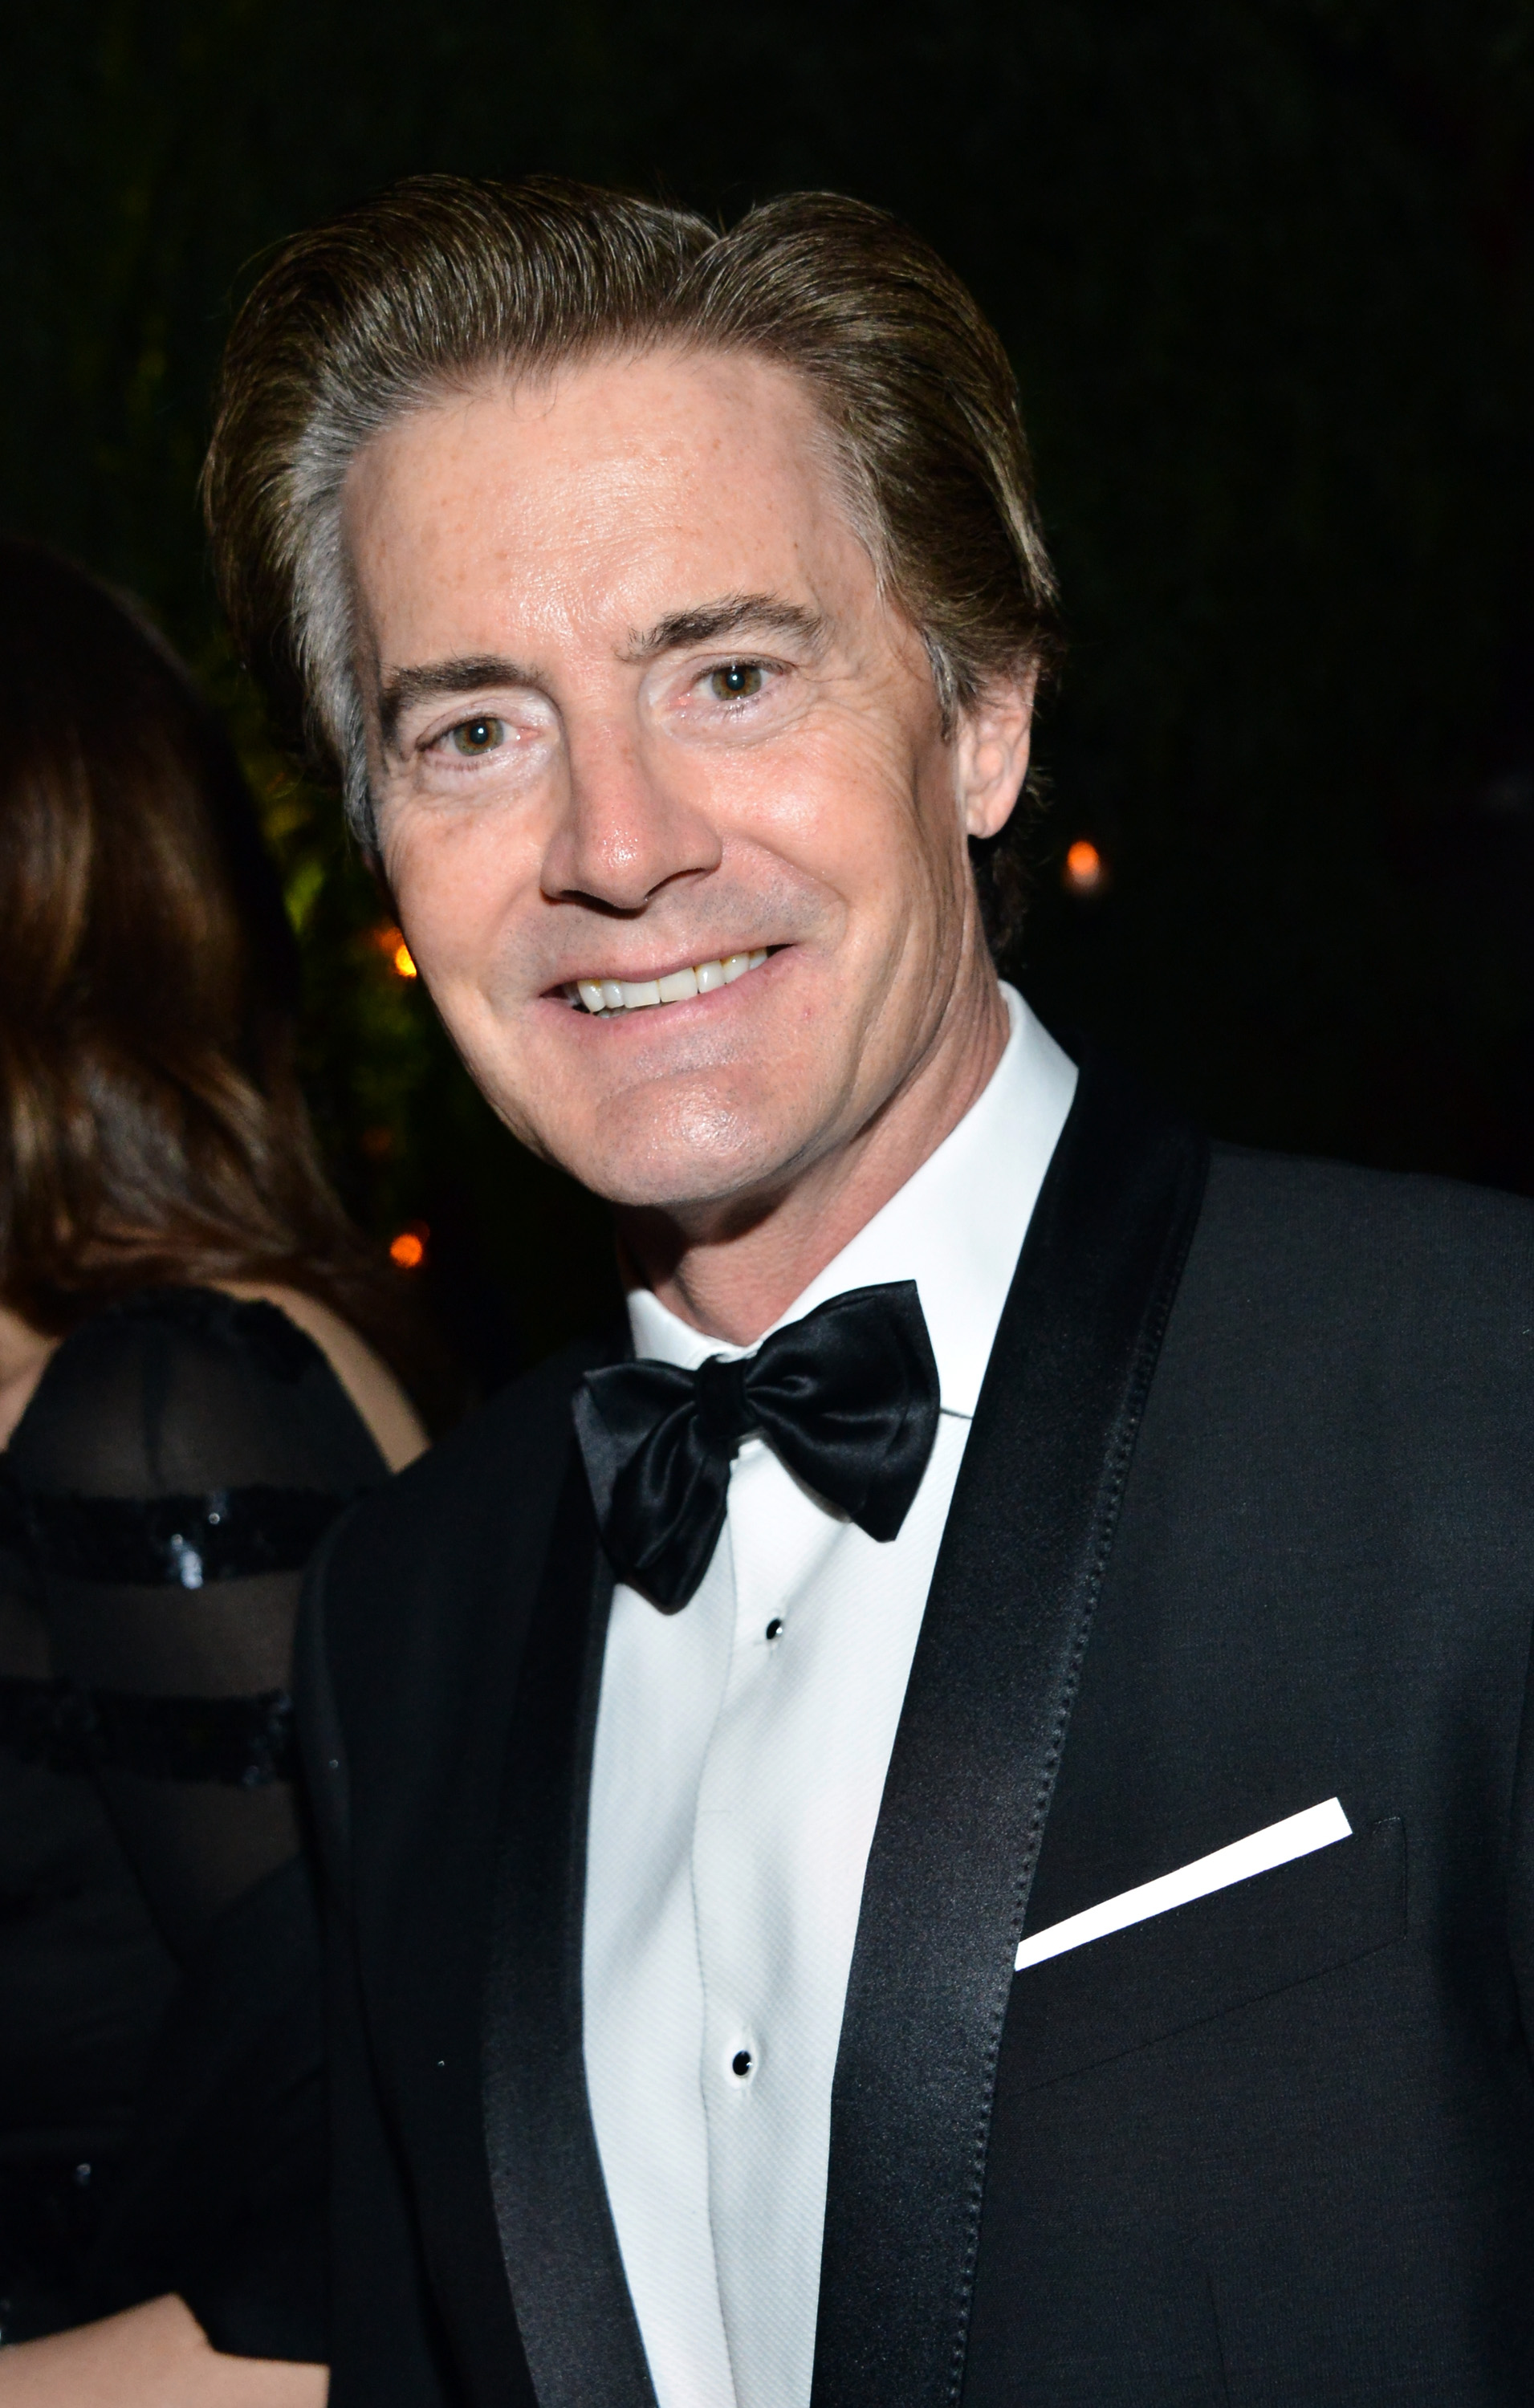 Kyle MacLachlan attends the 2015 Golden Globes After Party in Beverly Hills, Calif. on January 11, 2015.